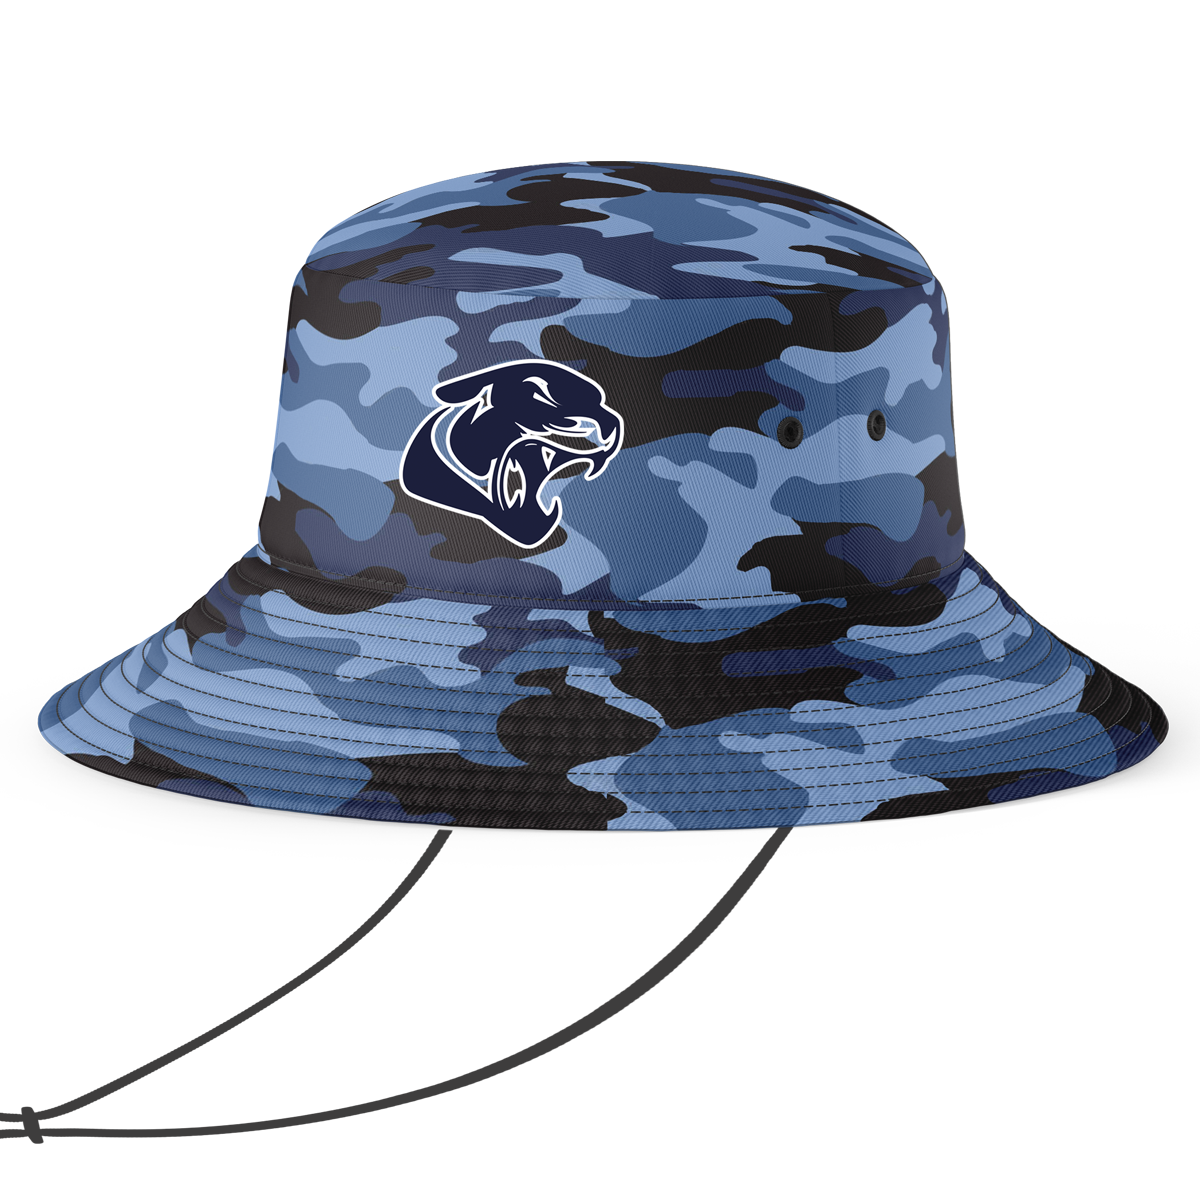 Cougars Camouflage Bucket Hat